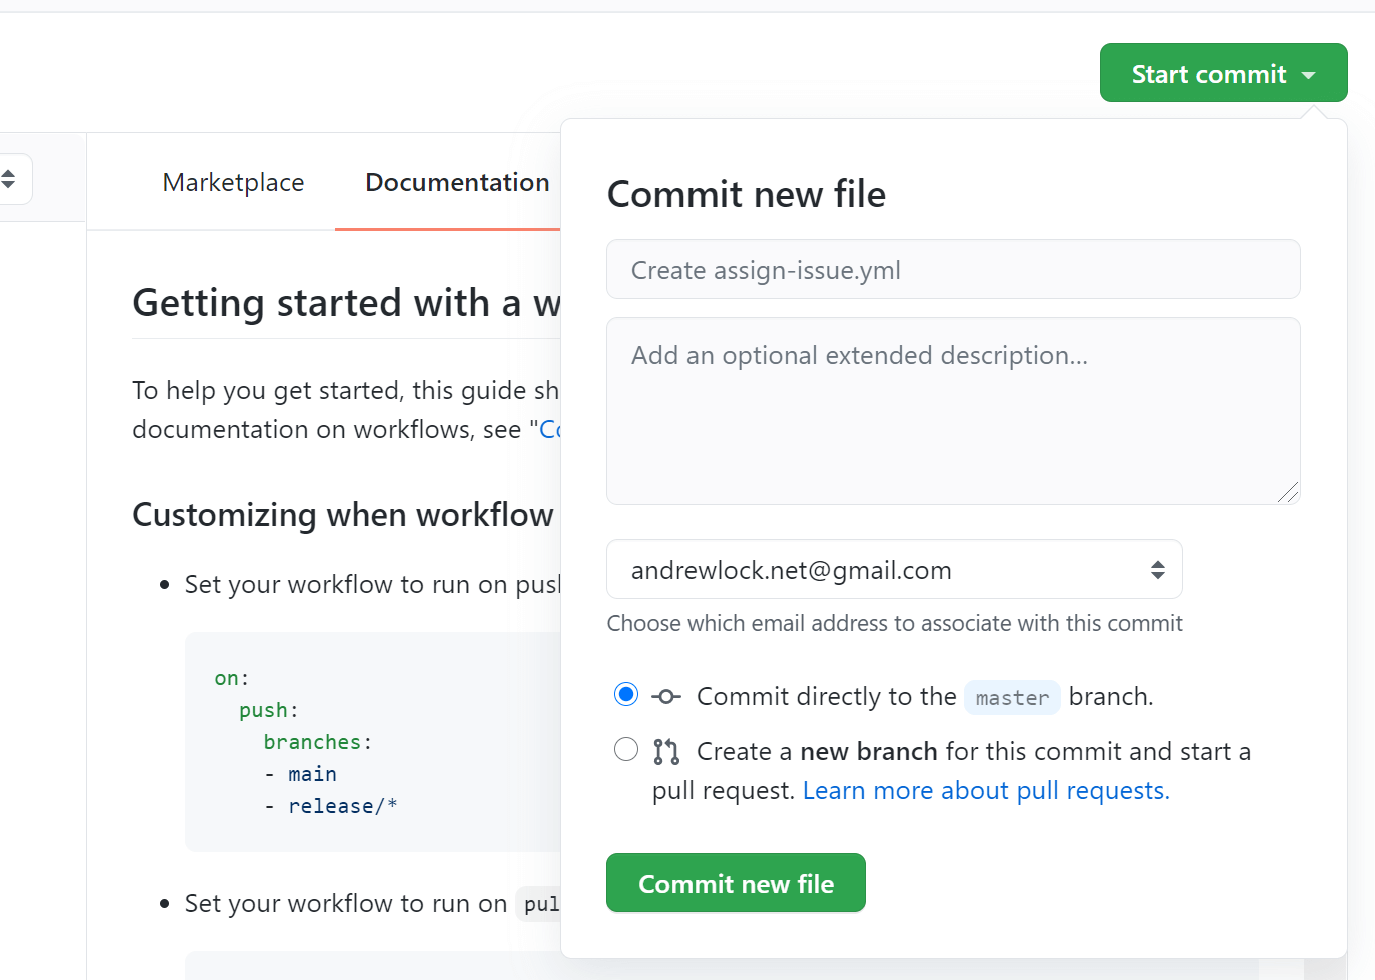 Committing the file